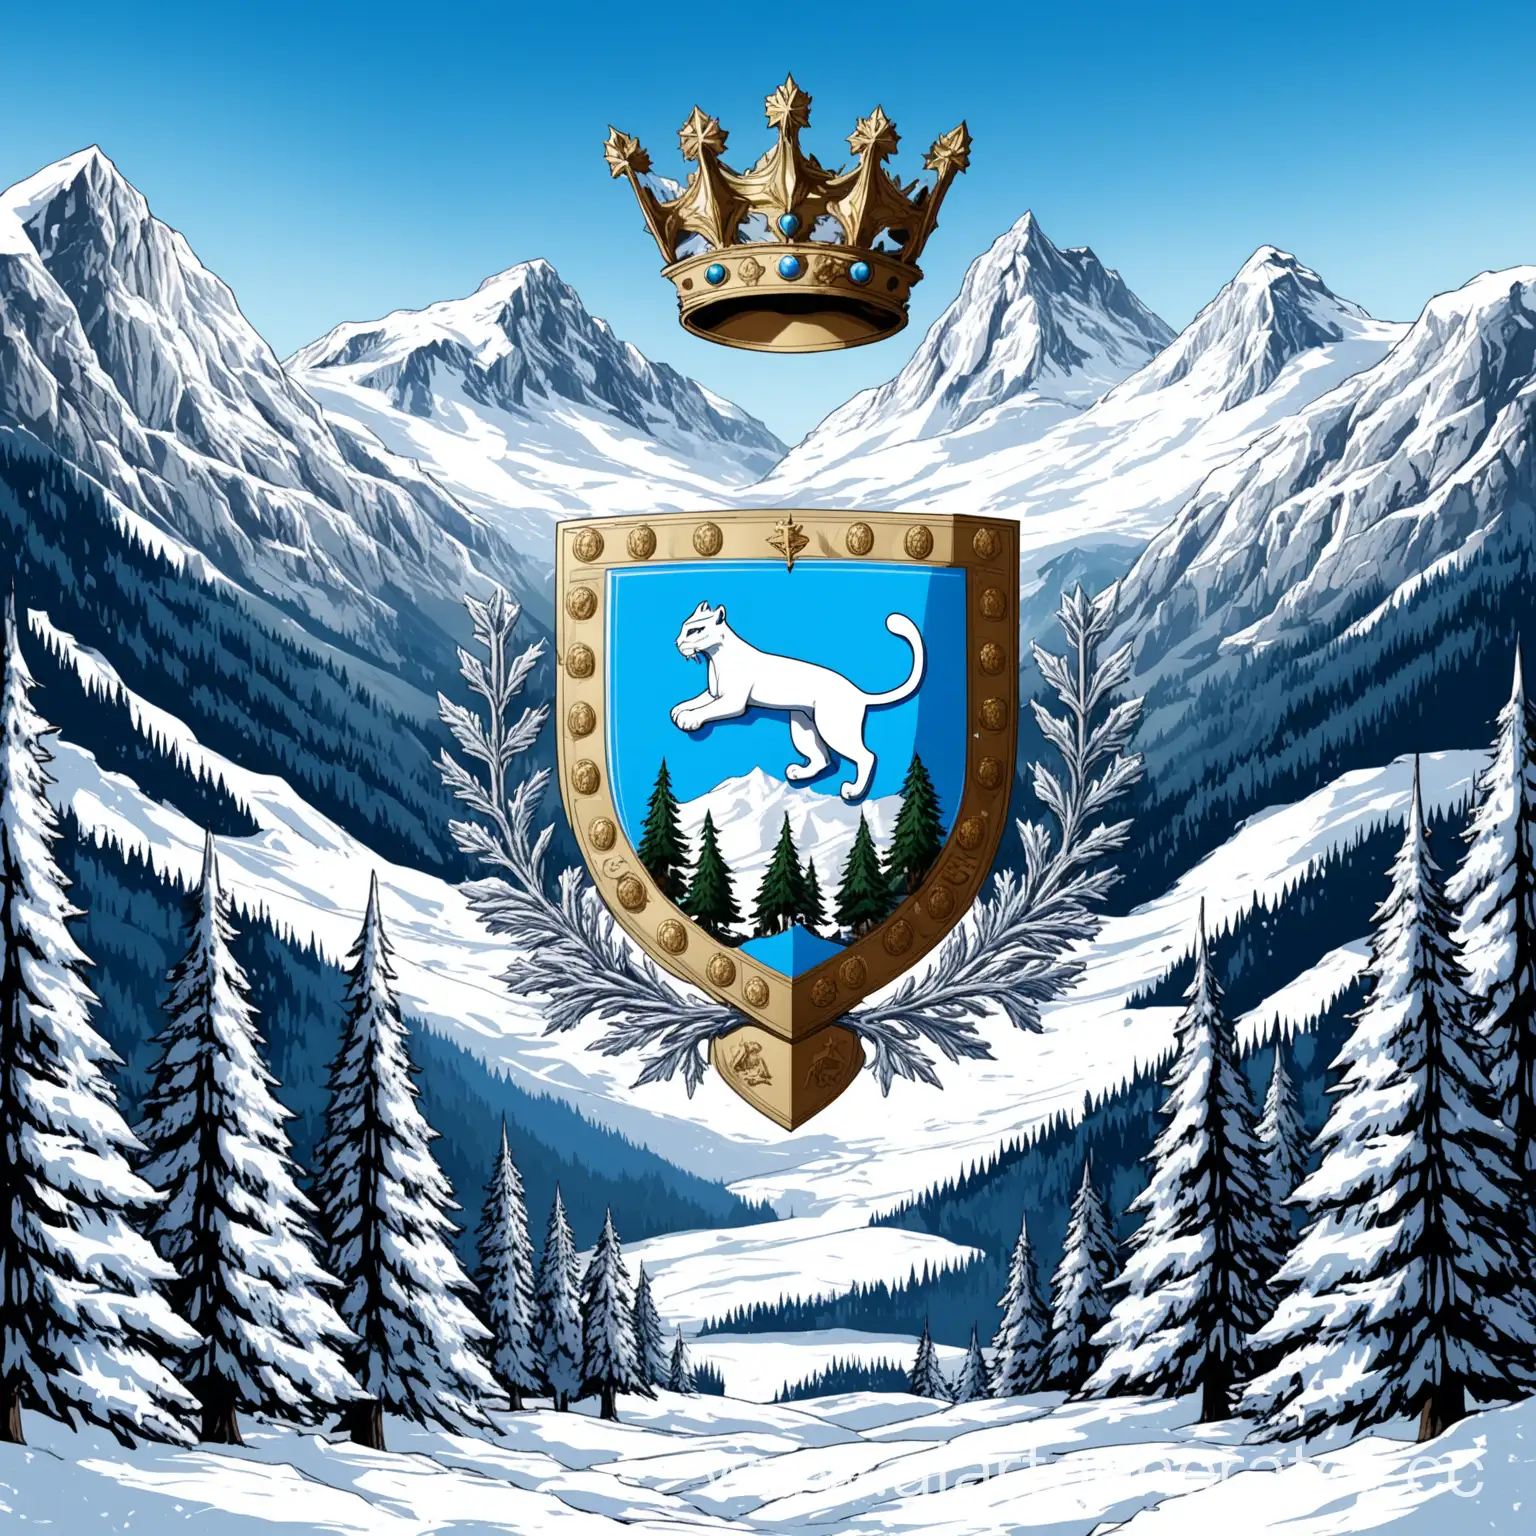 Fantasy-Country-Coat-of-Arms-with-Majestic-Mountains-and-Snowy-Fir-Trees